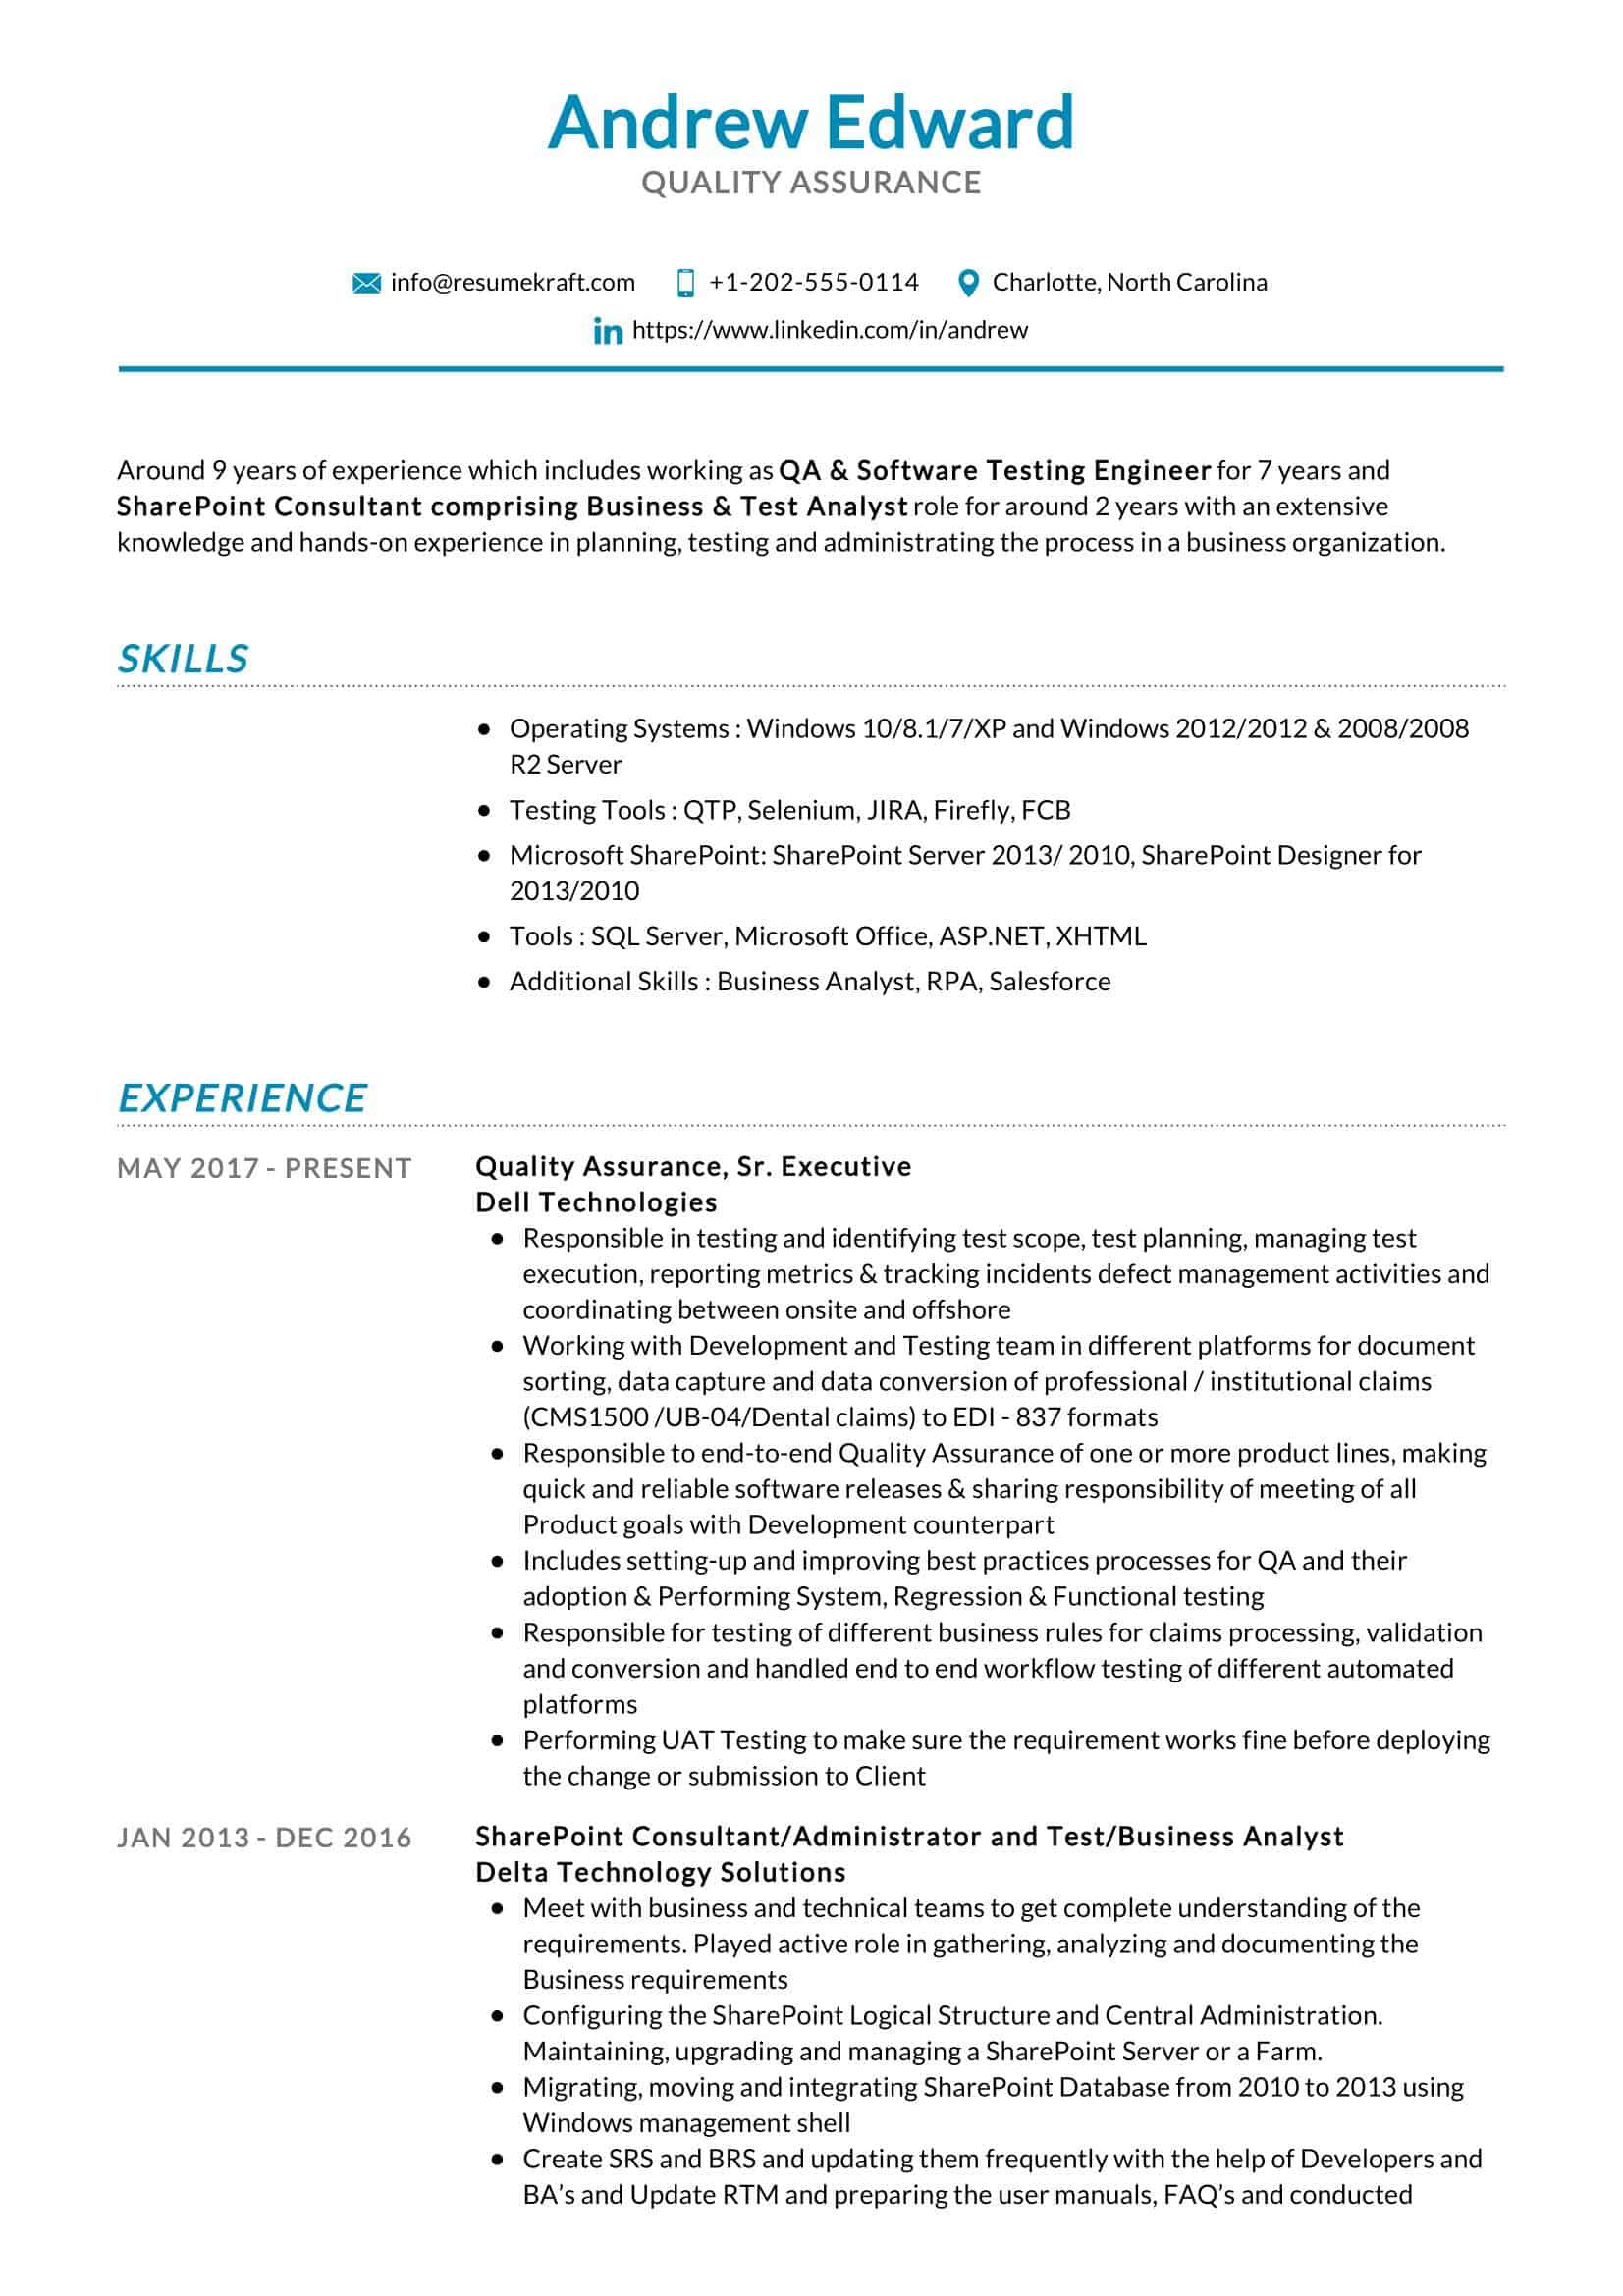 Sample Resume for Quality assurance Manager Quality assurance Resume Sample 2021 Writing Tips – Resumekraft